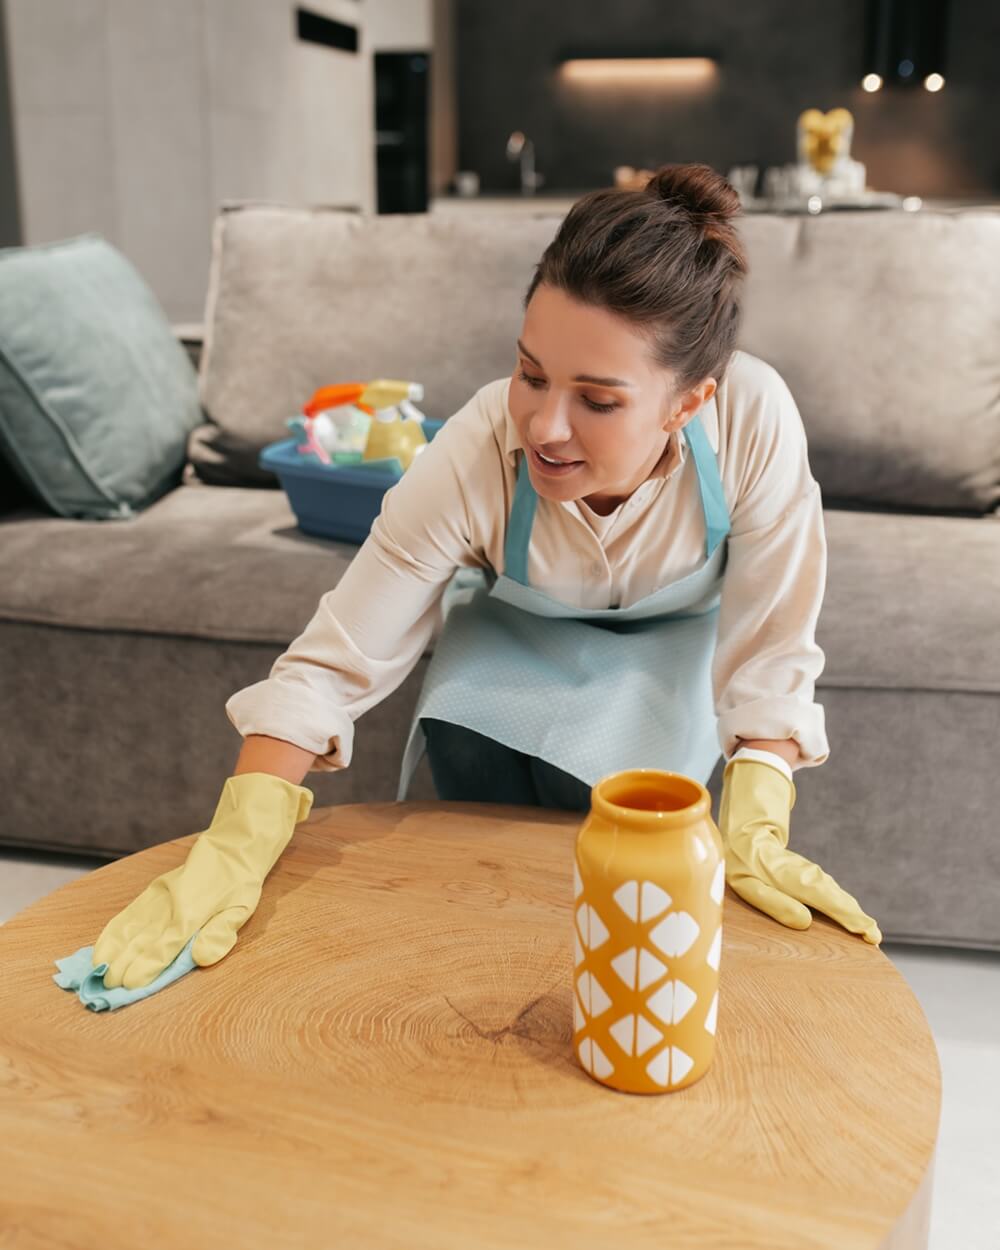 Women cleaning the room table surfaces using sustainable cleaning practices